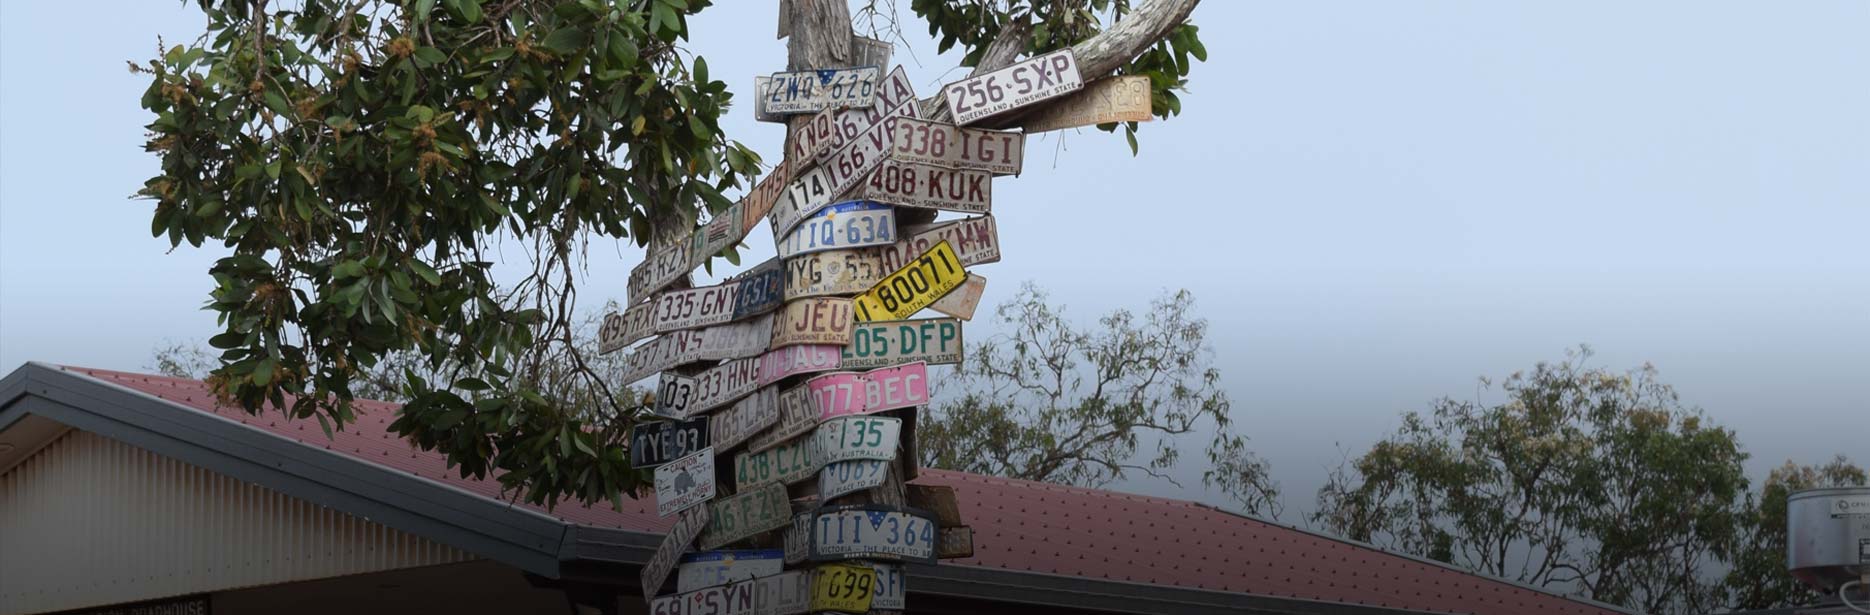 The number plate tree at Bramwell Station in Cape York